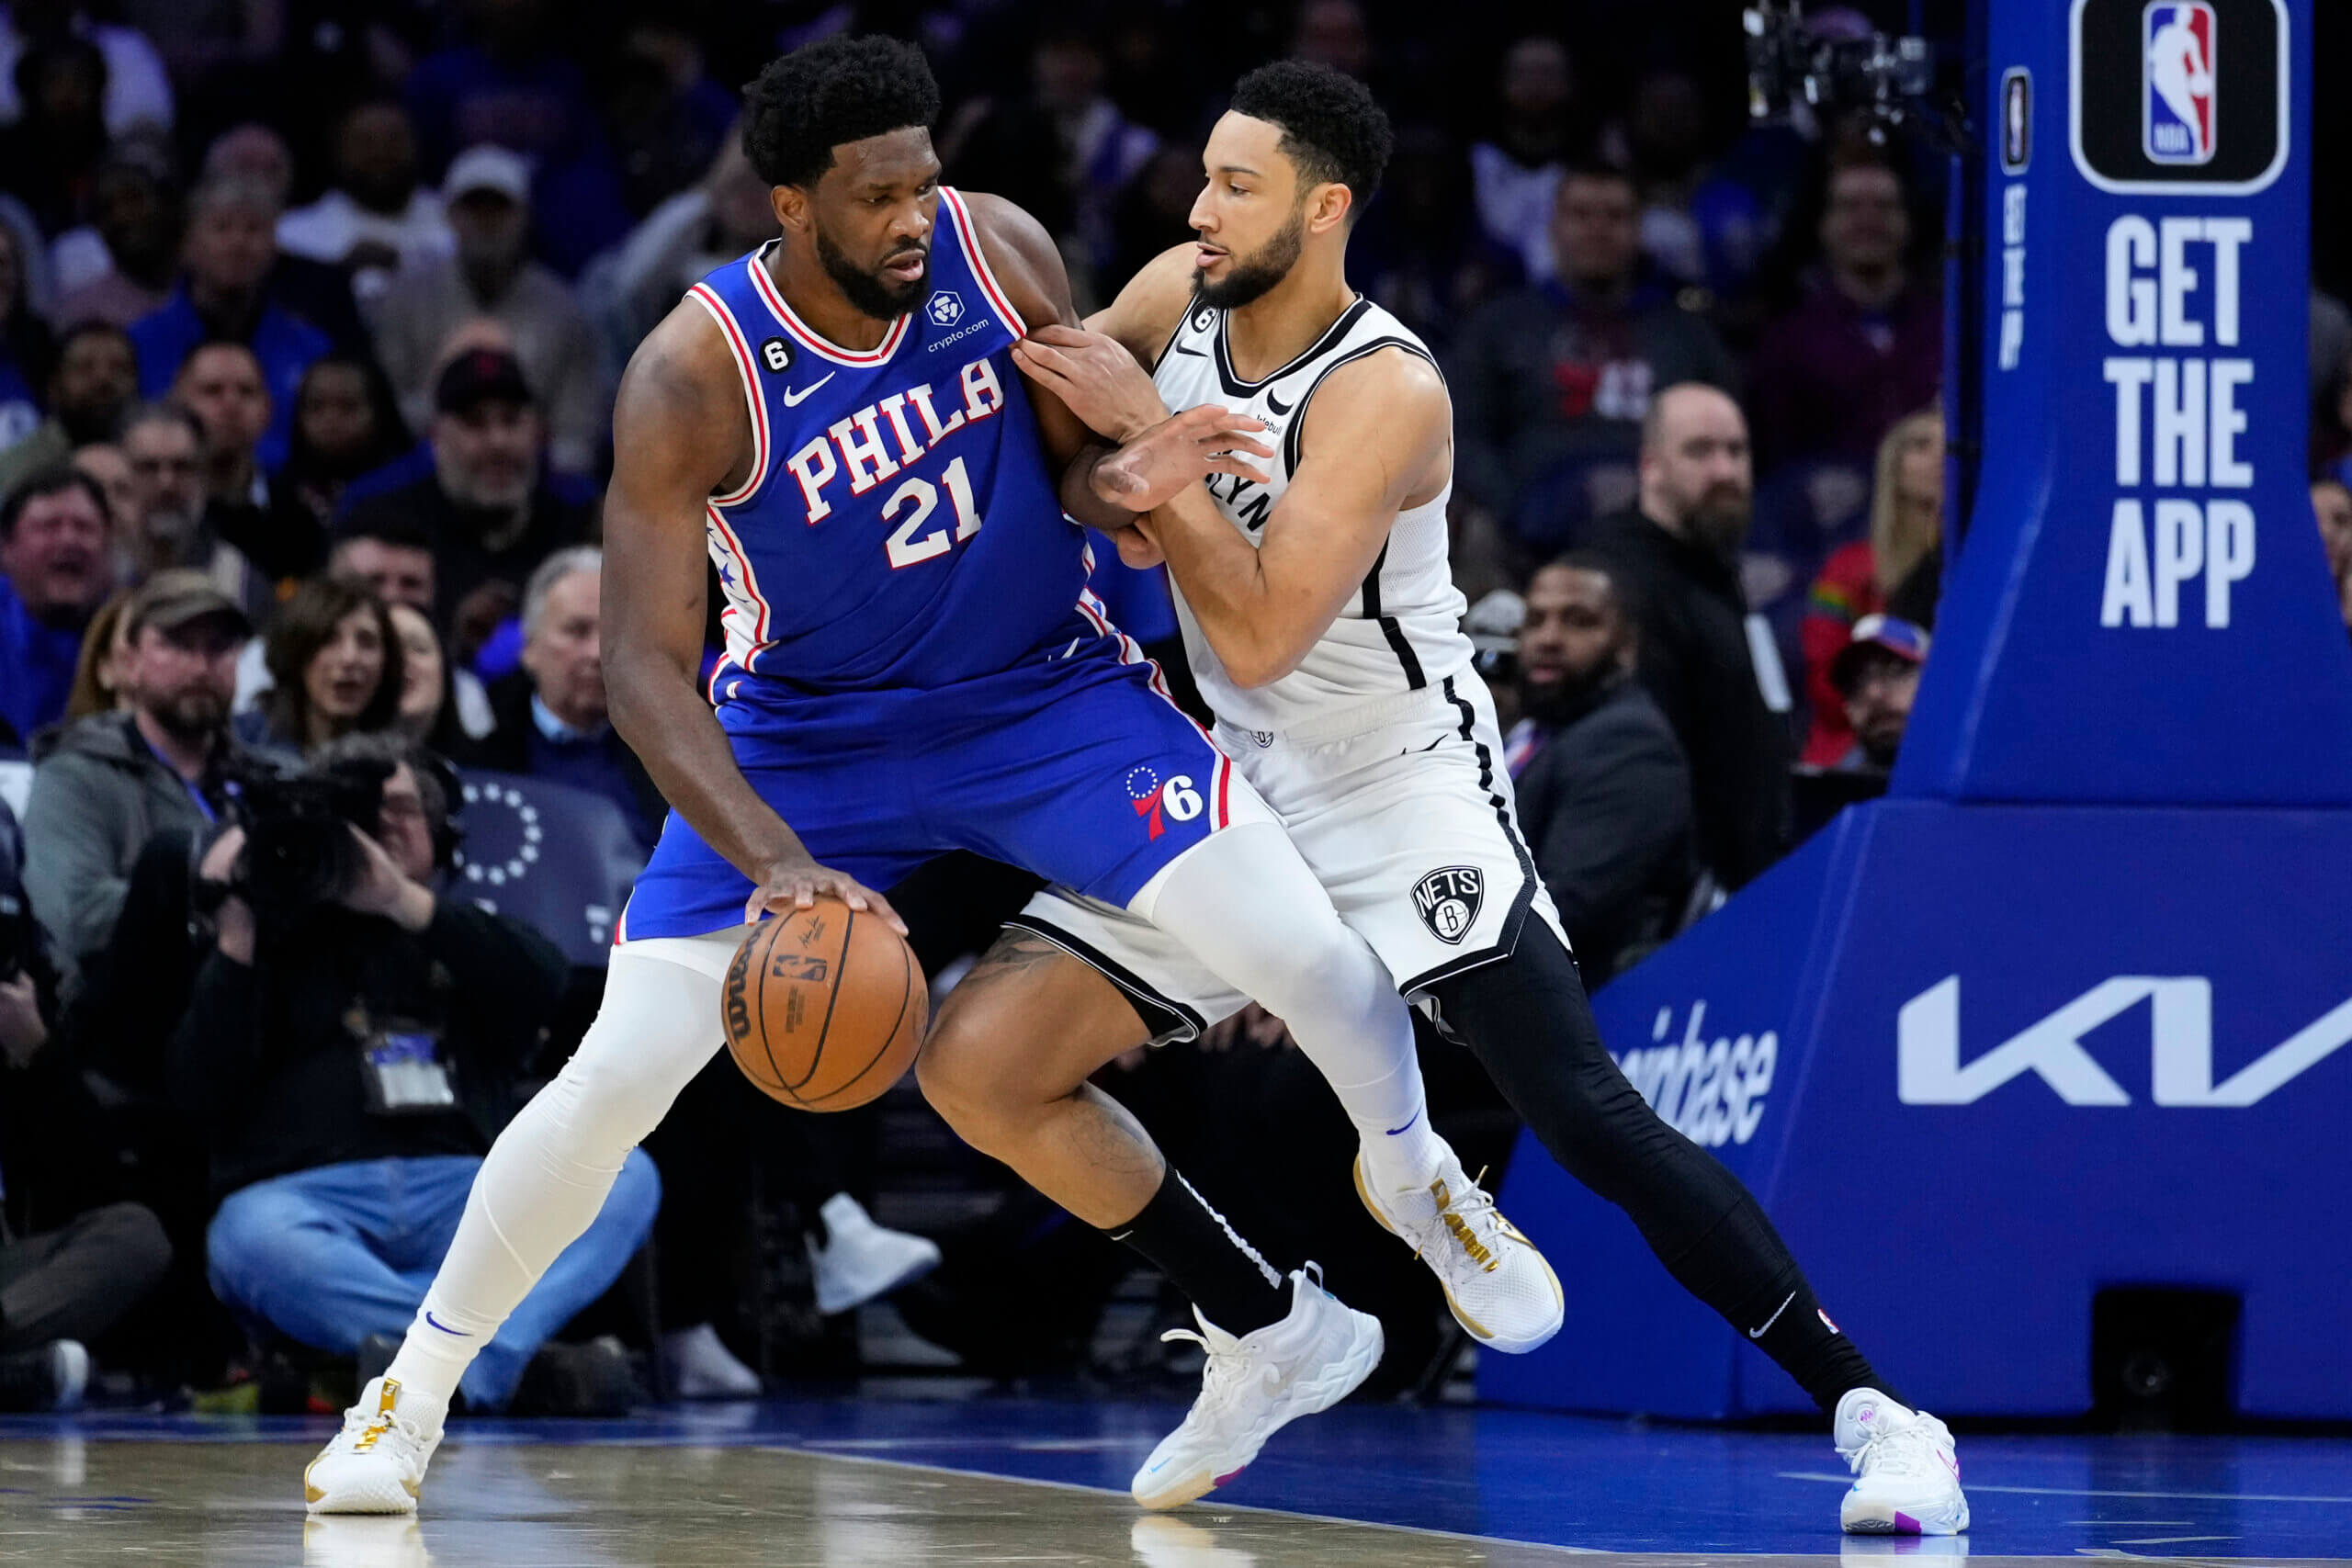 For Ben Simmons's Return, Philadelphia Was Ready But The Sixers